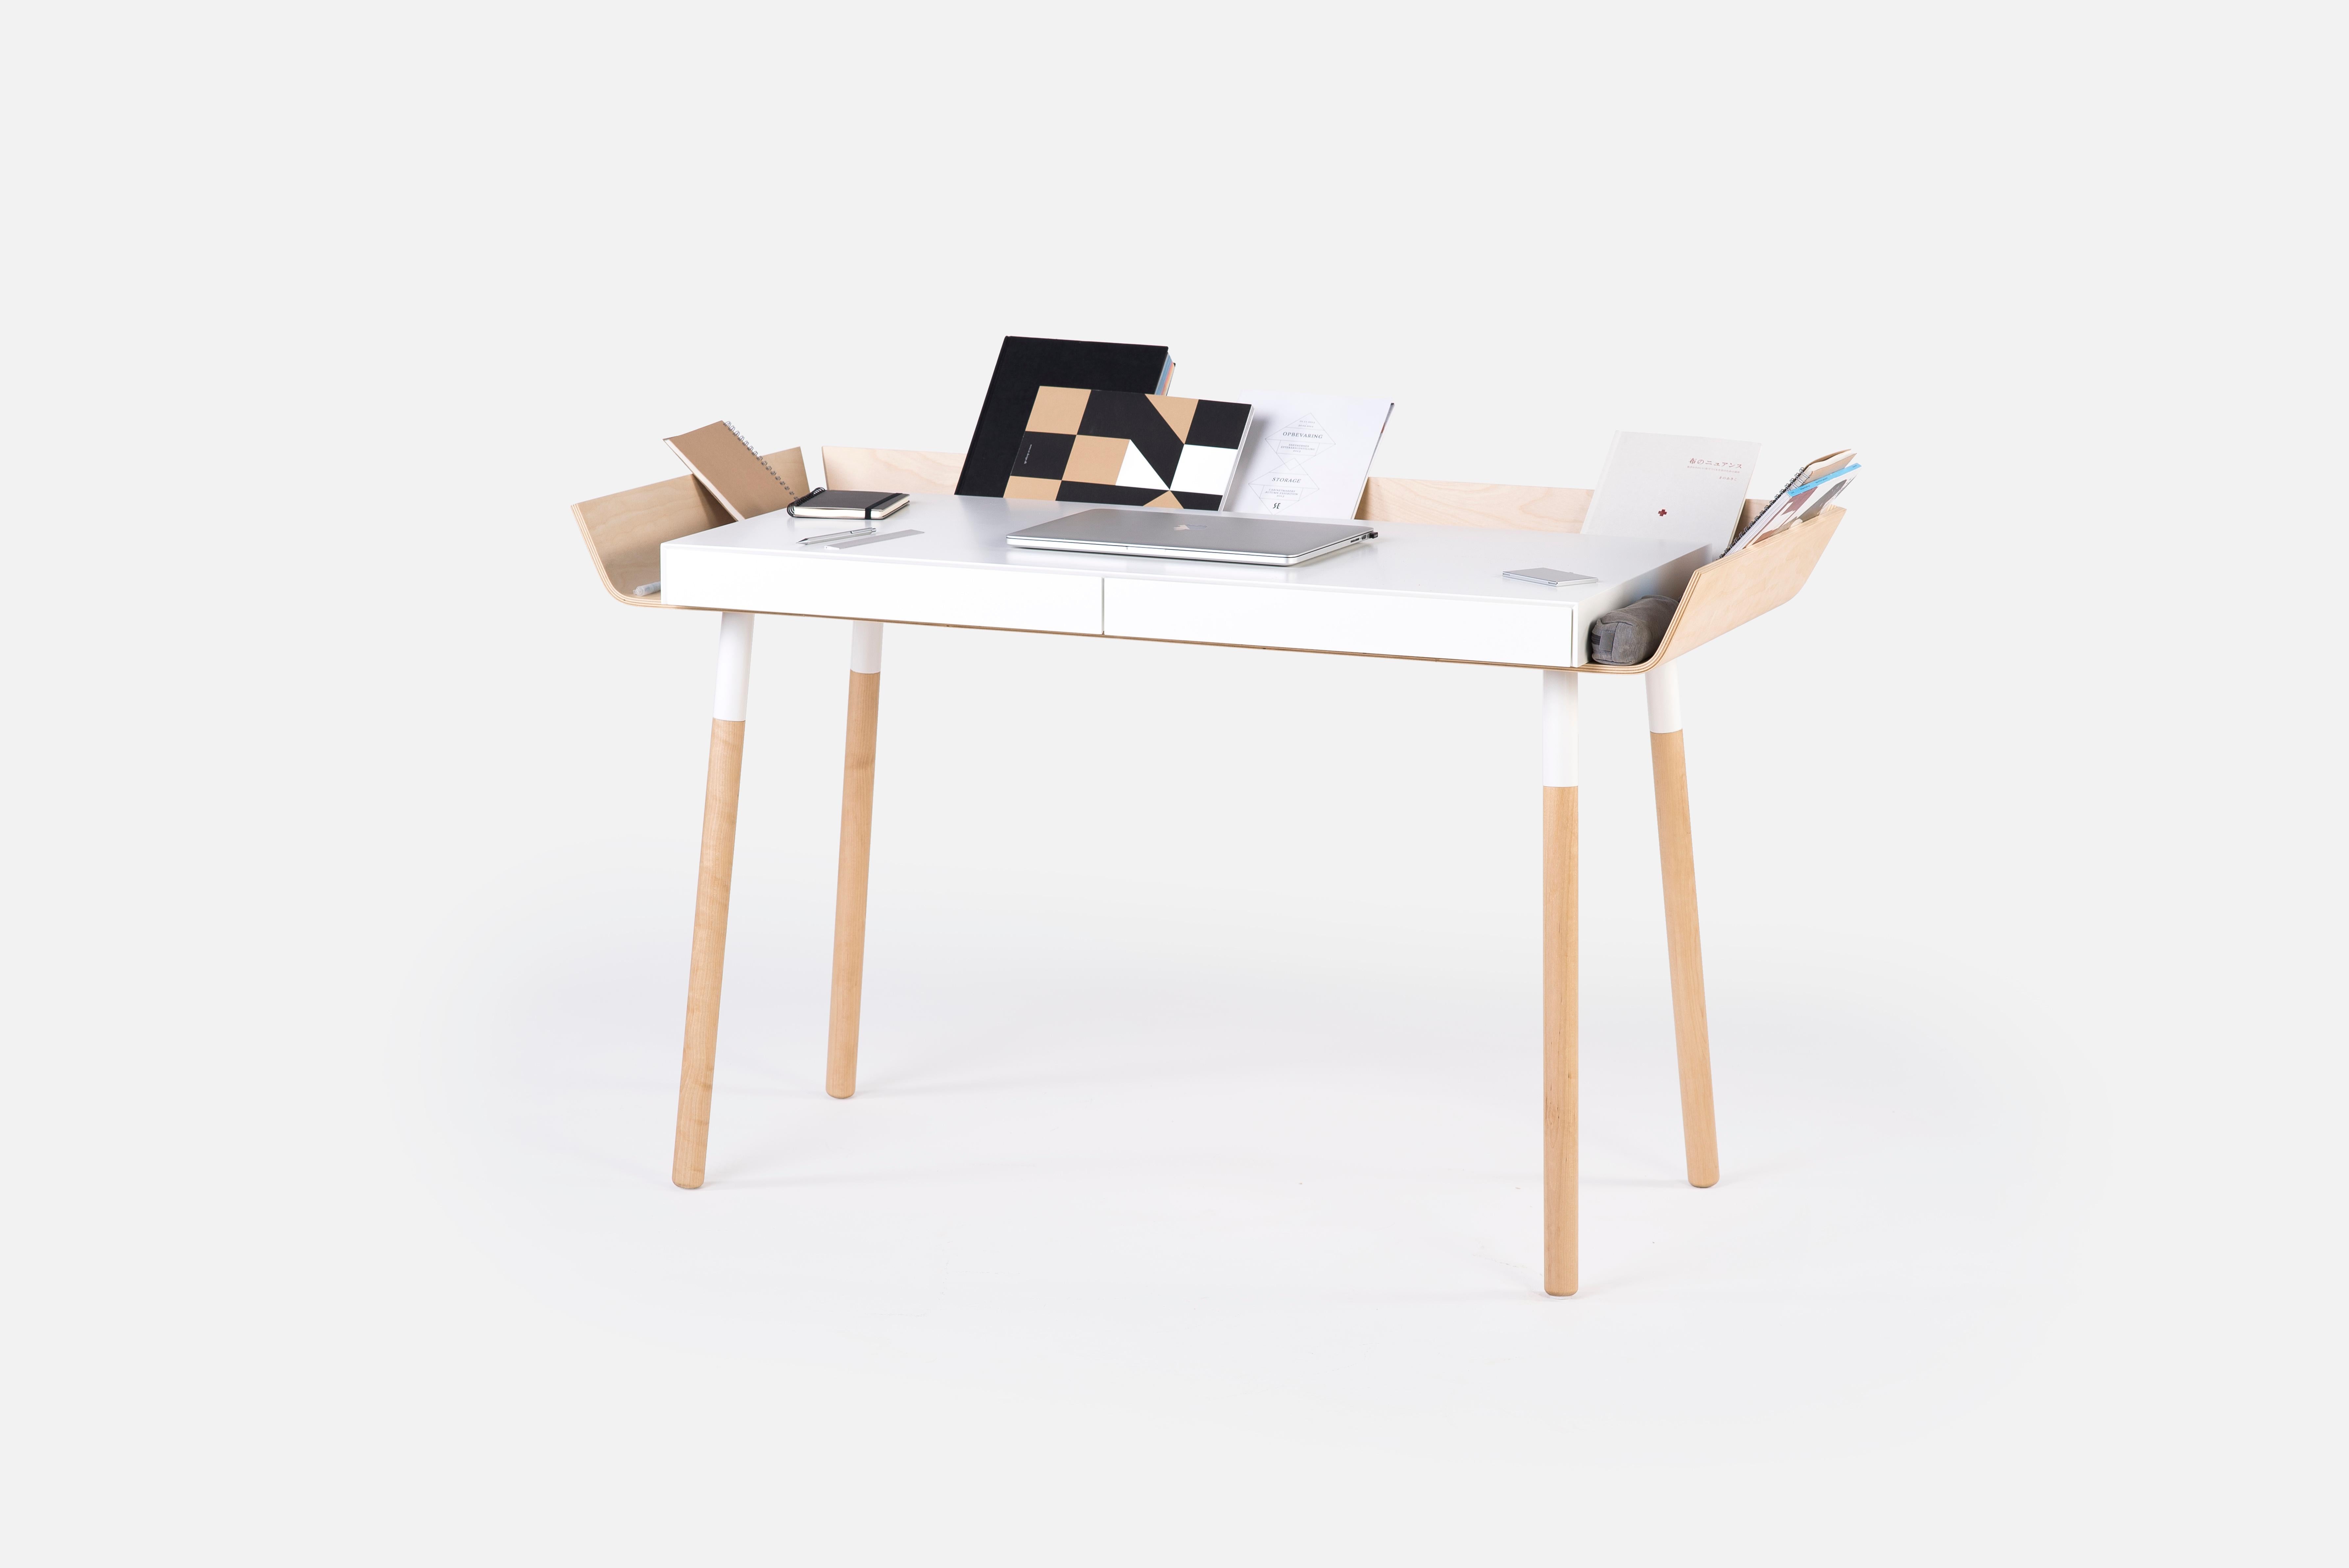 A writing desk, designed for working people. For creative people. People who know the value of efficient work.

While developing the idea of the My Writing Desk (MWD), designer Inesa Malafej had a clear goal – to reduce the chaotic clutter that